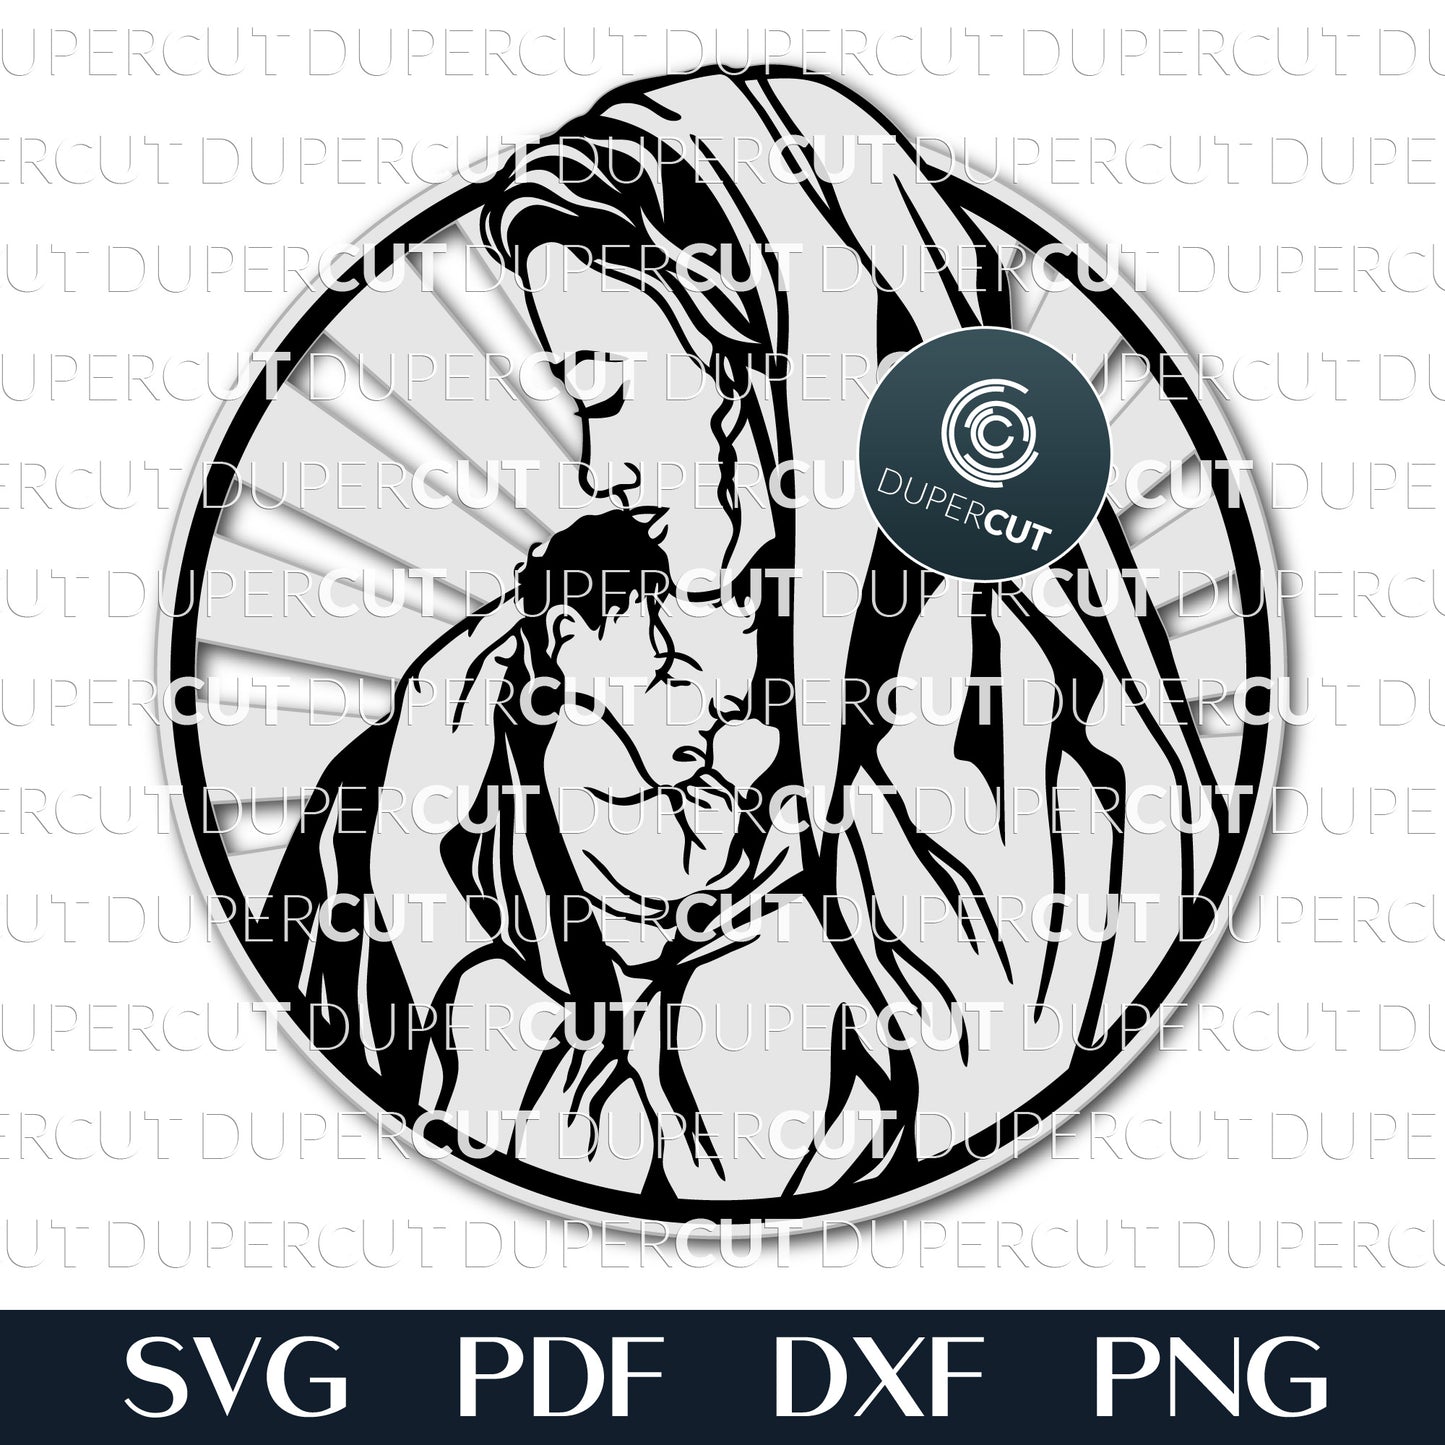 Holy Mary carrying baby Jesus DIY sign ornament - SVG DXF layered cutting files for Glowforge, Cricut, Silhouette, scroll saw pattern by DuperCut